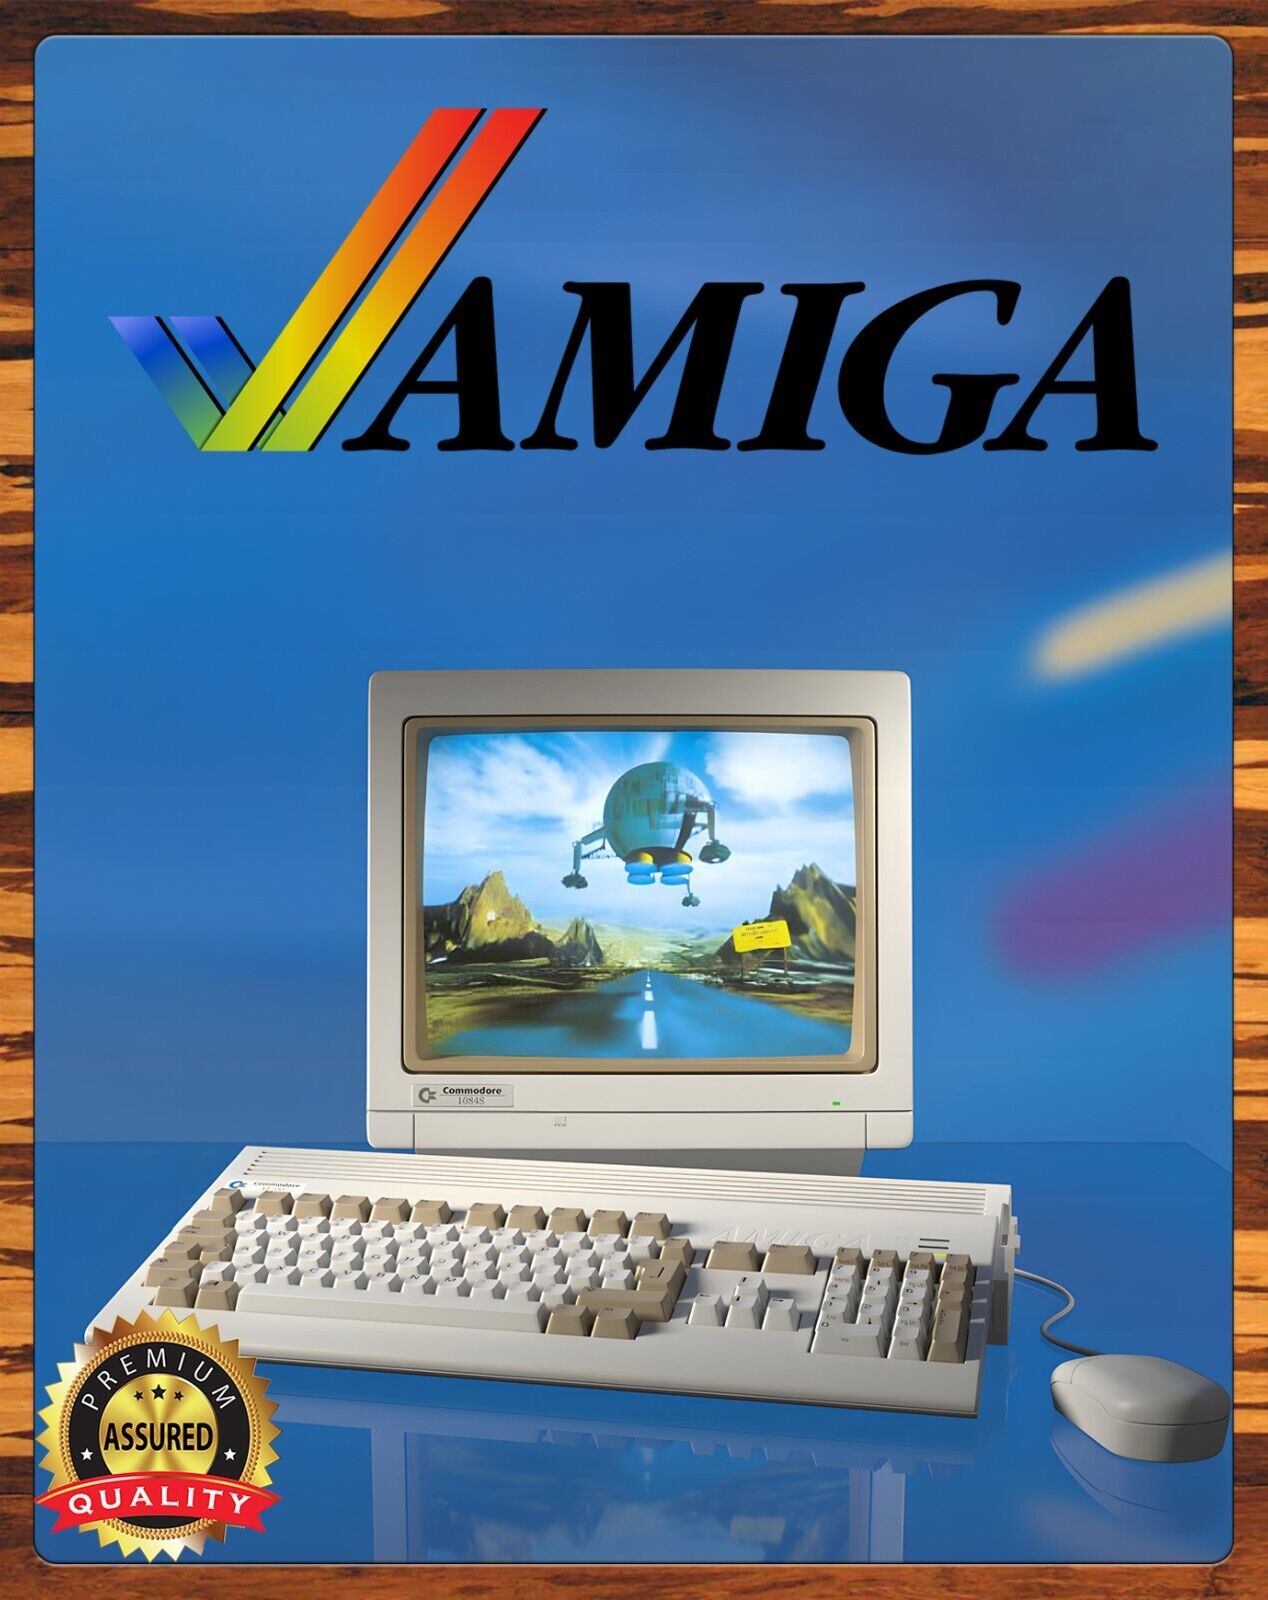 Amiga 1200 Computer - The Computer For The Rest Of Us - Metal Sign 11 x 14